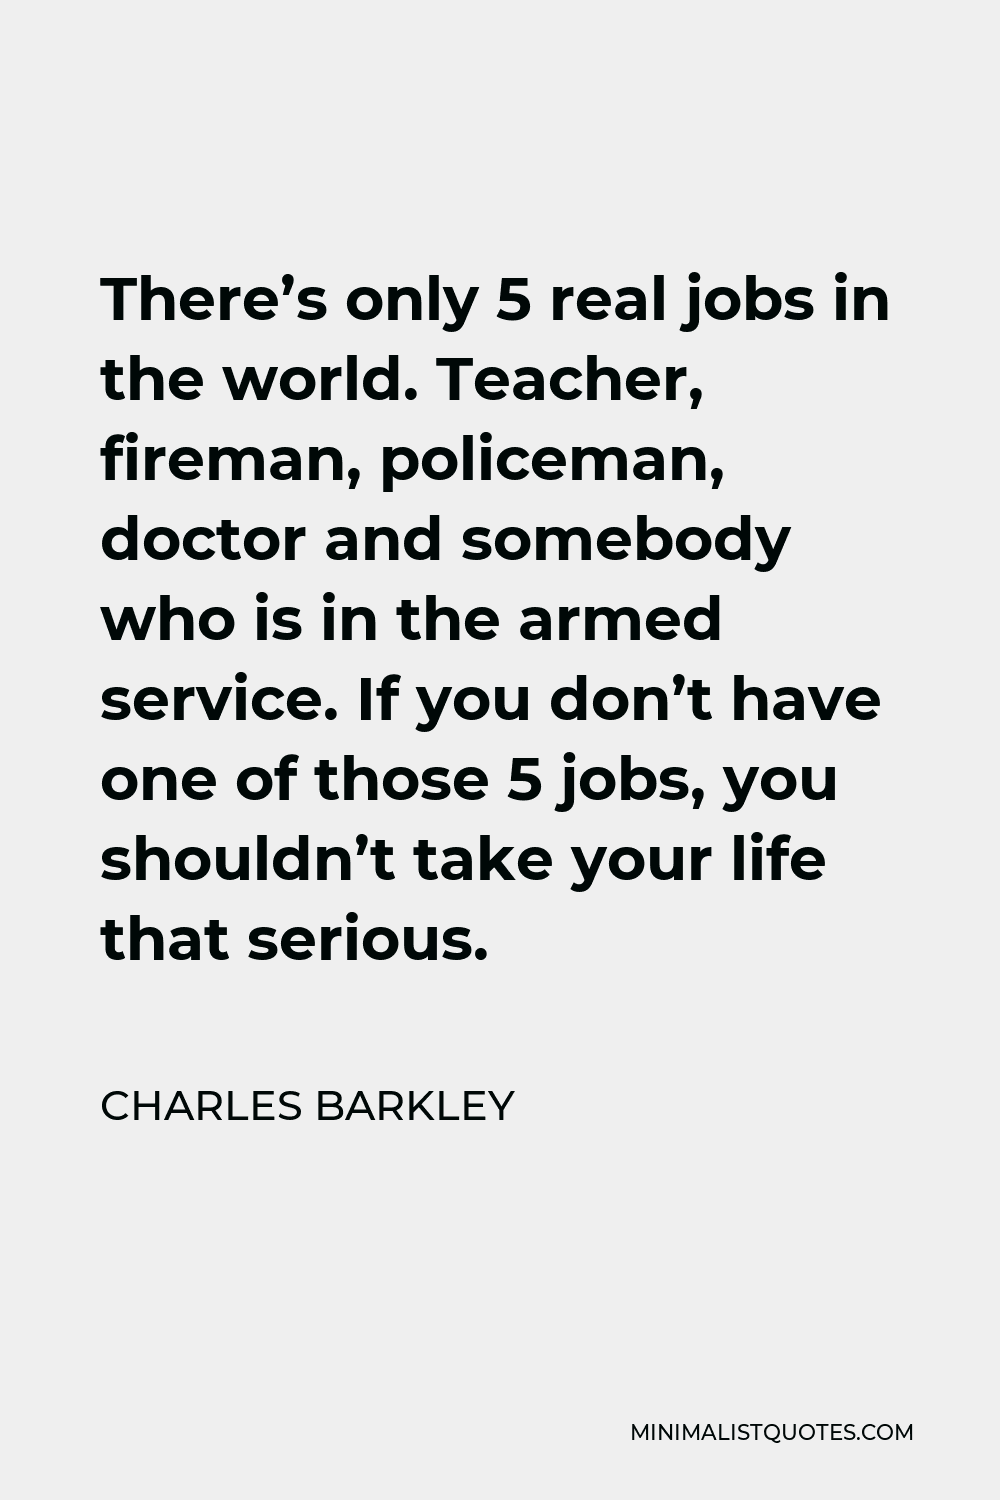 Charles Barkley Quote - There’s only 5 real jobs in the world. Teacher, fireman, policeman, doctor and somebody who is in the armed service. If you don’t have one of those 5 jobs, you shouldn’t take your life that serious.